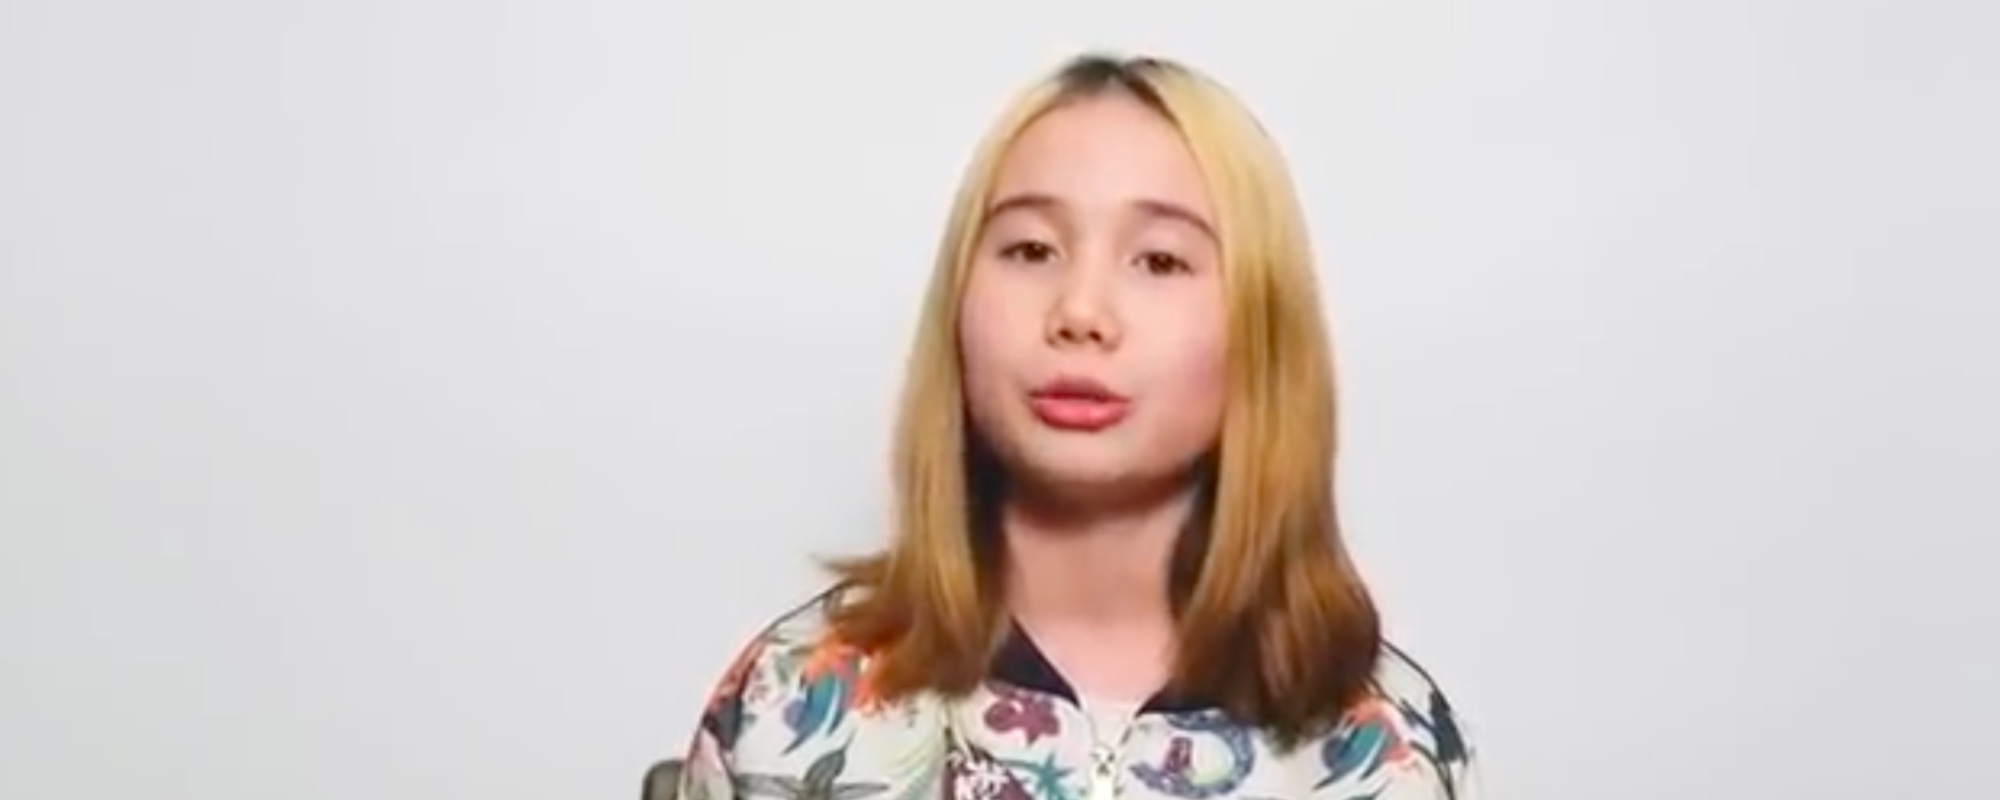 Viral Rapper and Influencer Lil Tay Suddenly Dead at 14